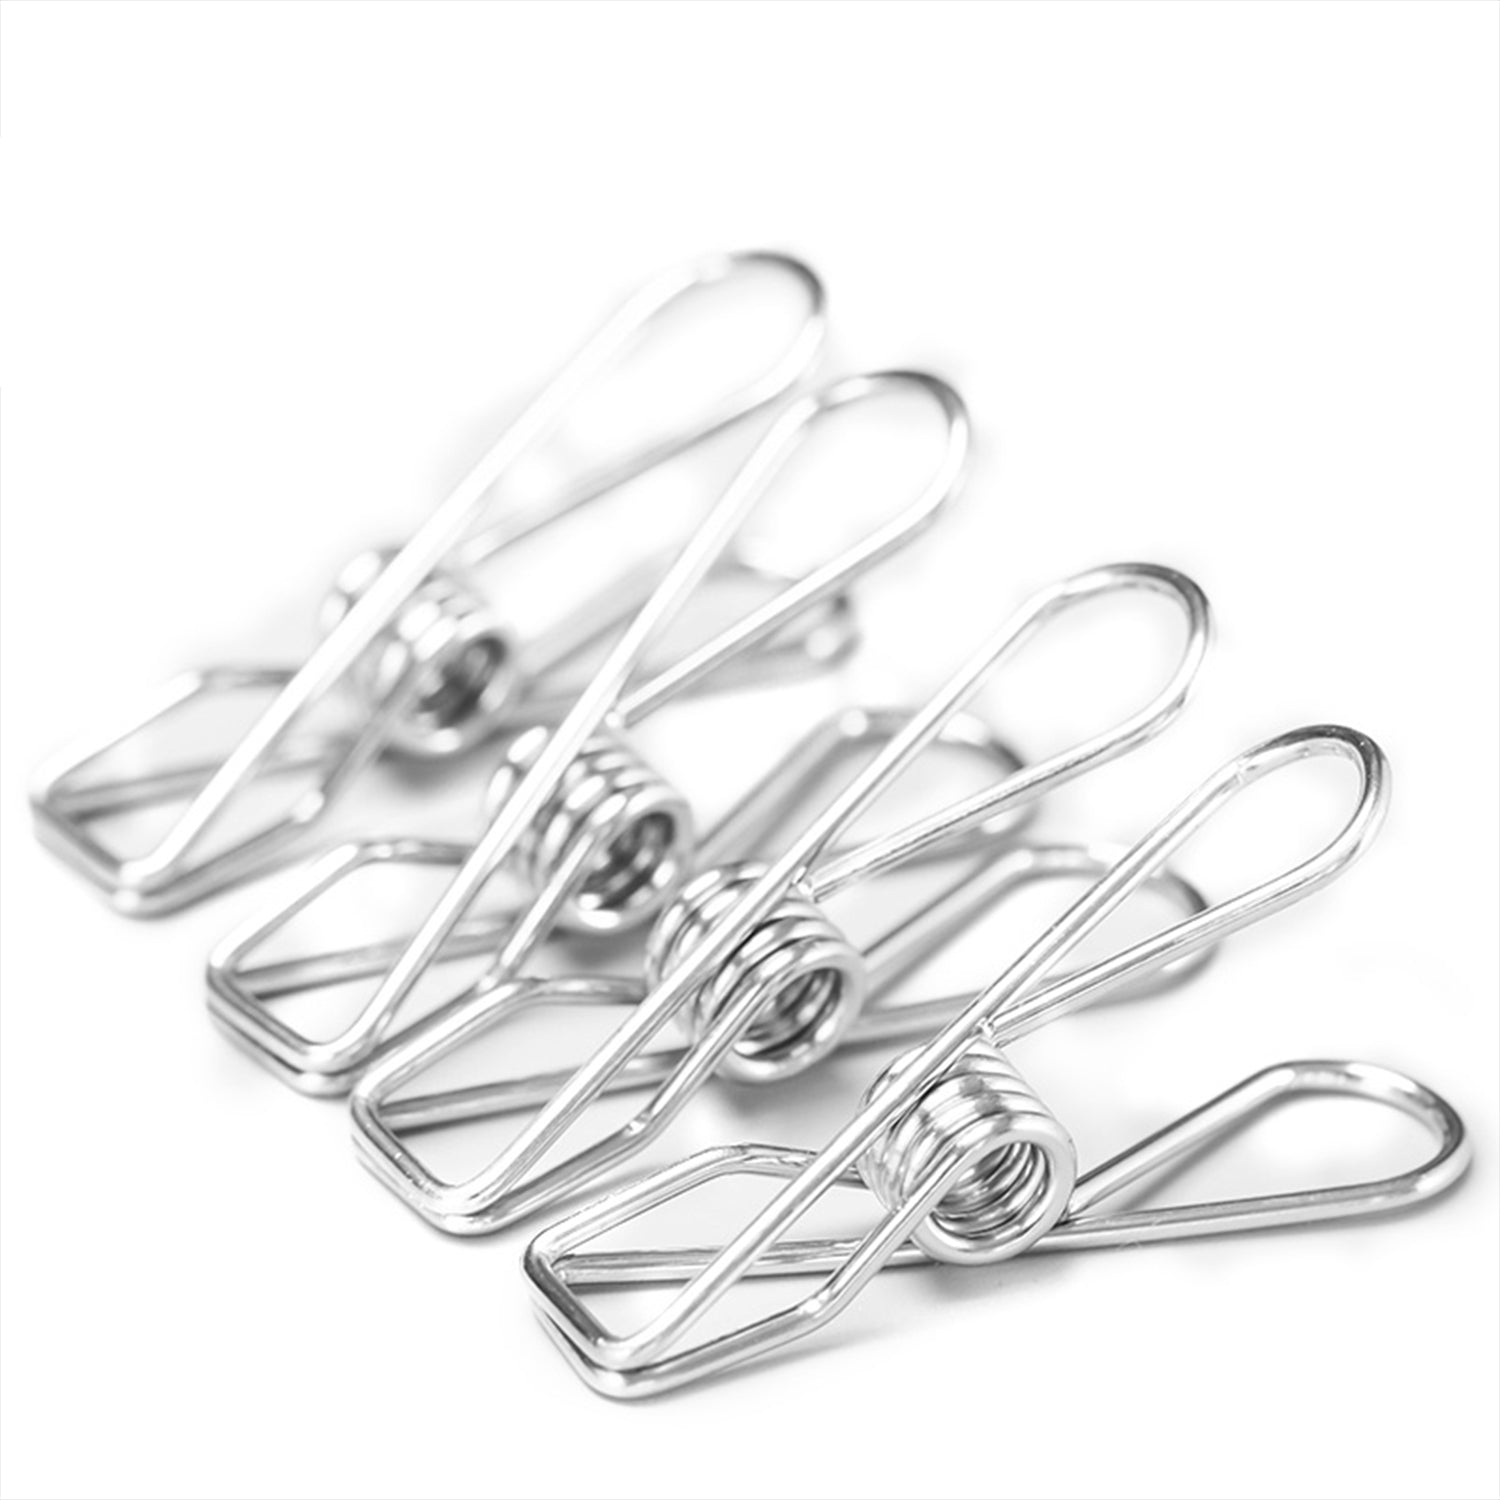 Stainless Steel Spring Clip